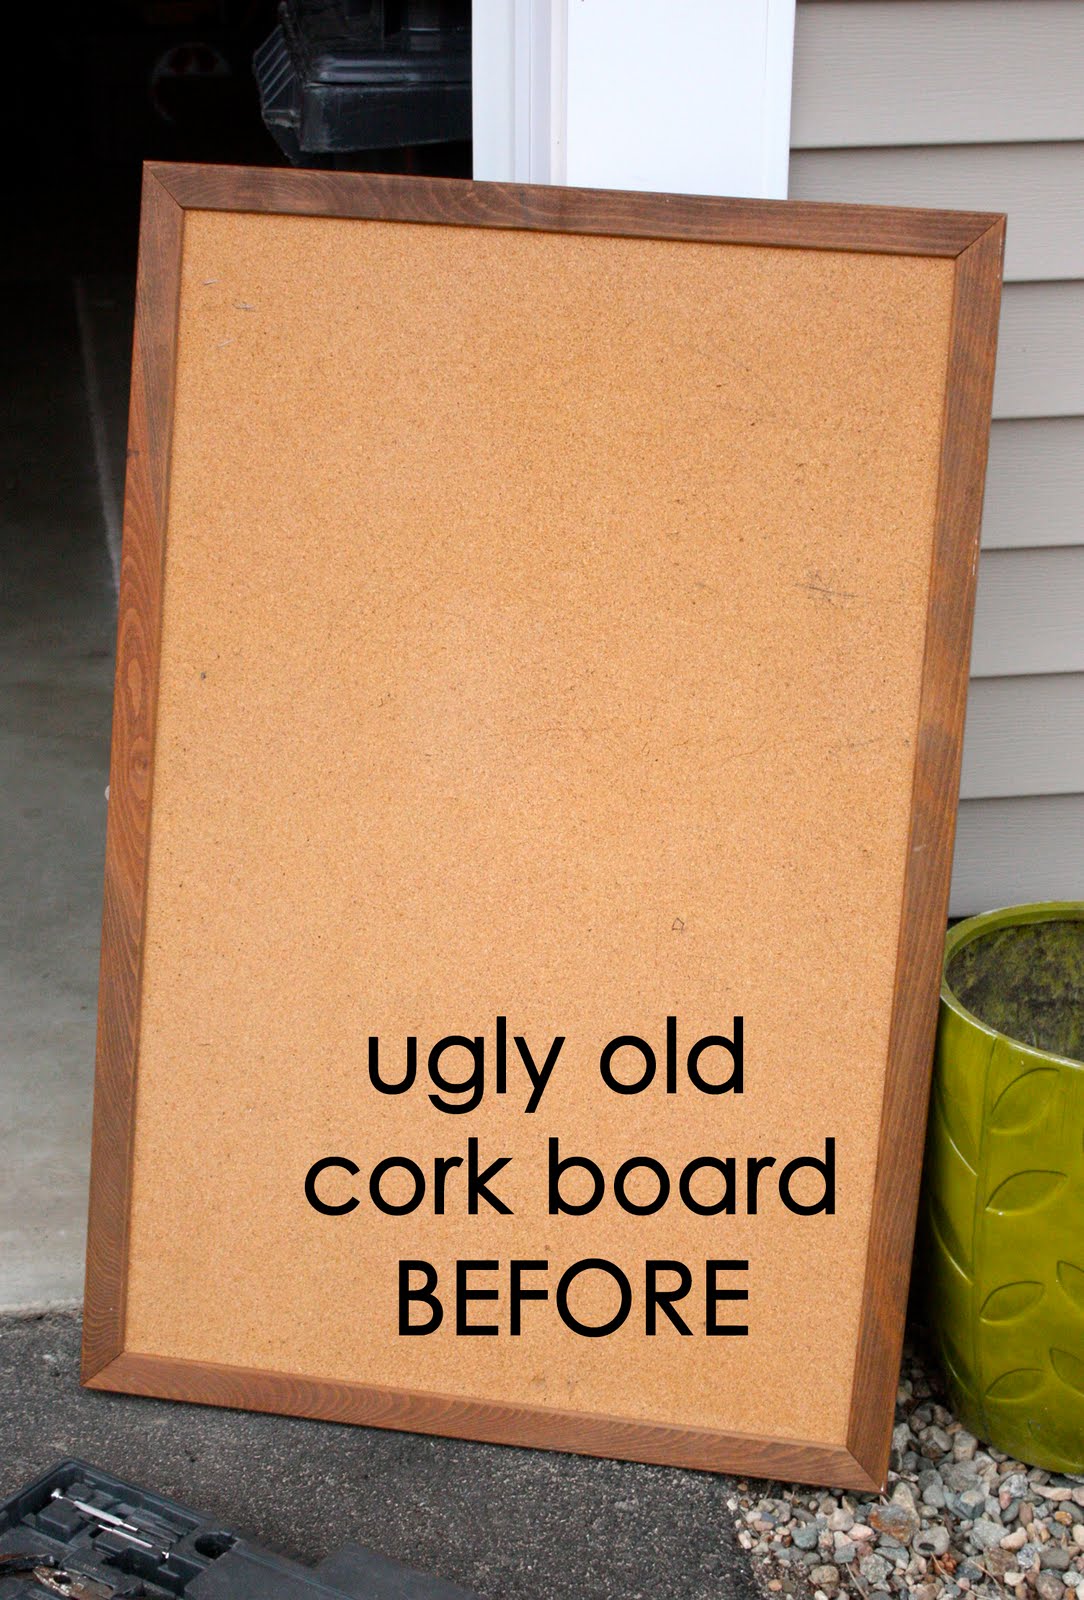 Zaaberry: New Life for an Old Cork Board